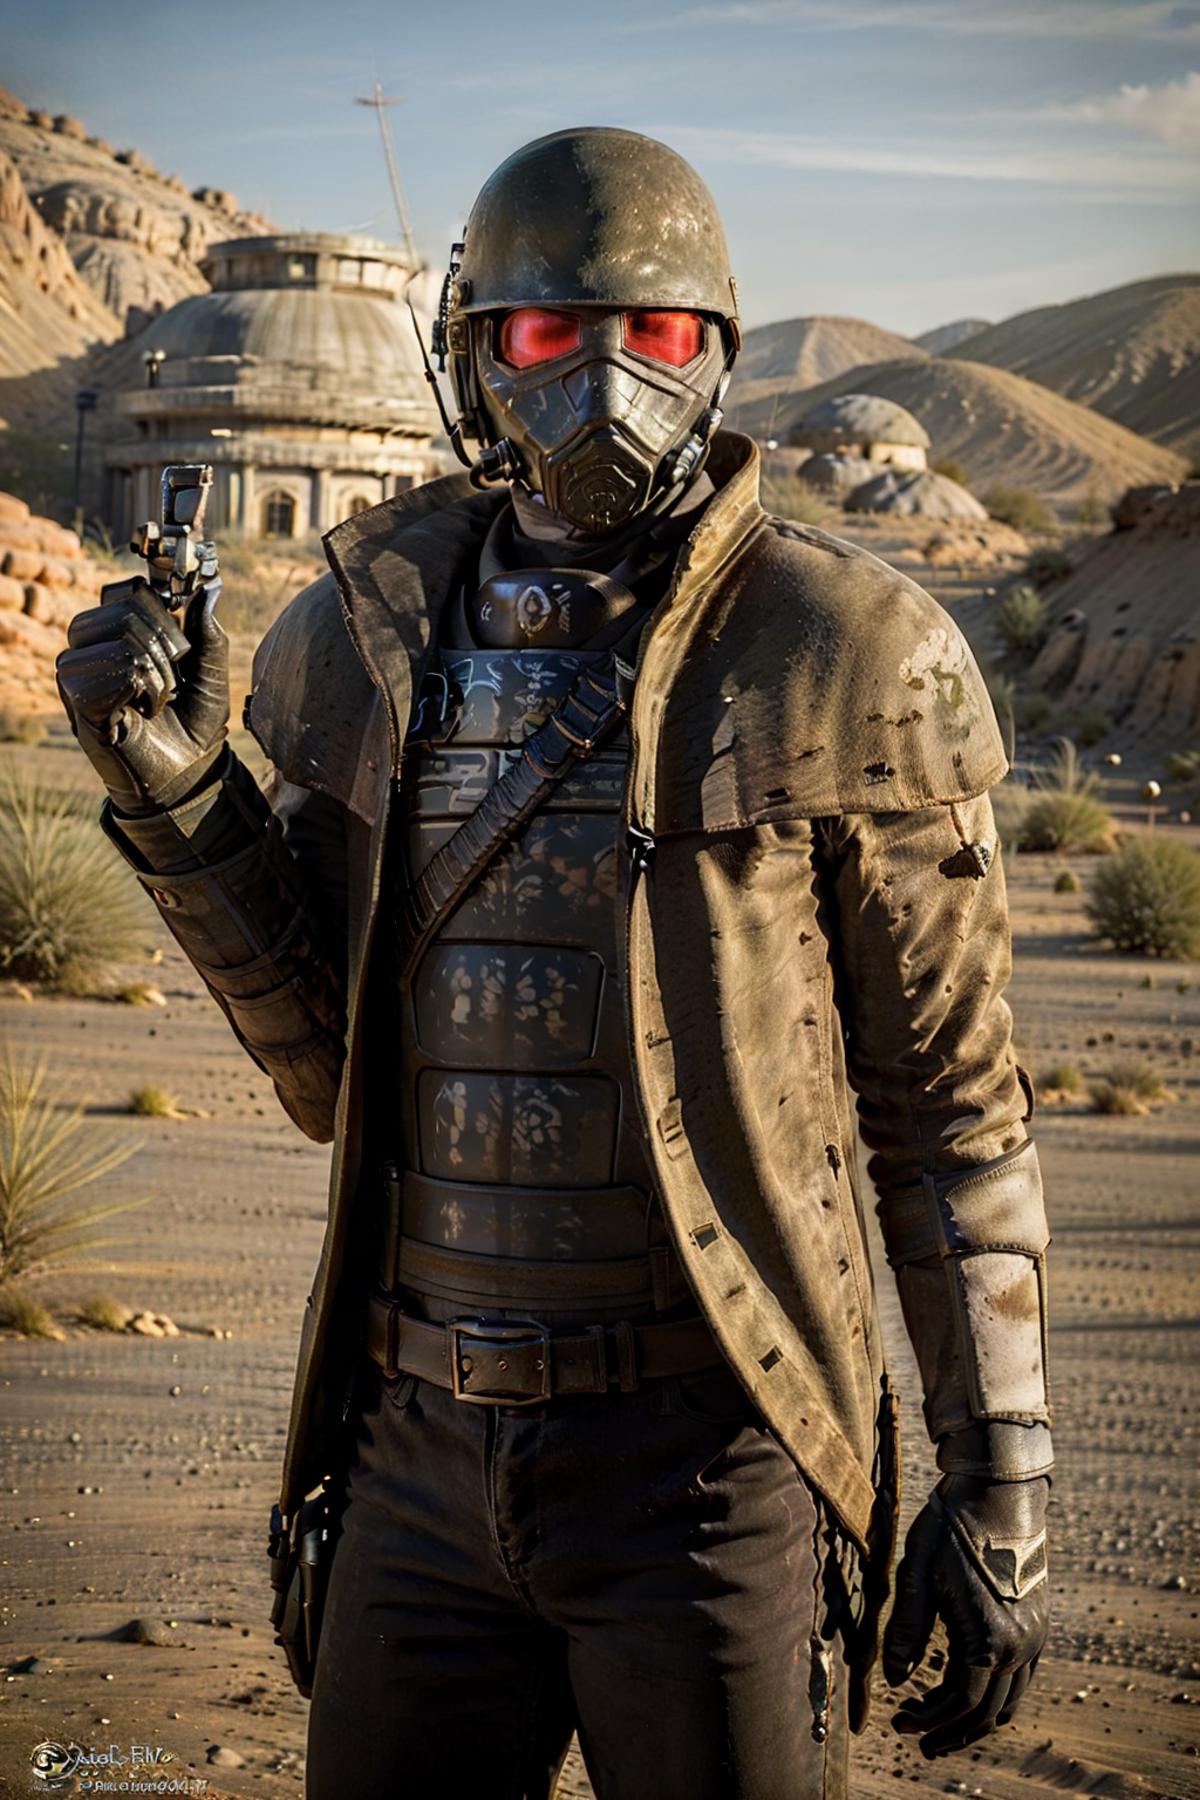 Combat Ranger from Fallout New Vegas image by Darknoice